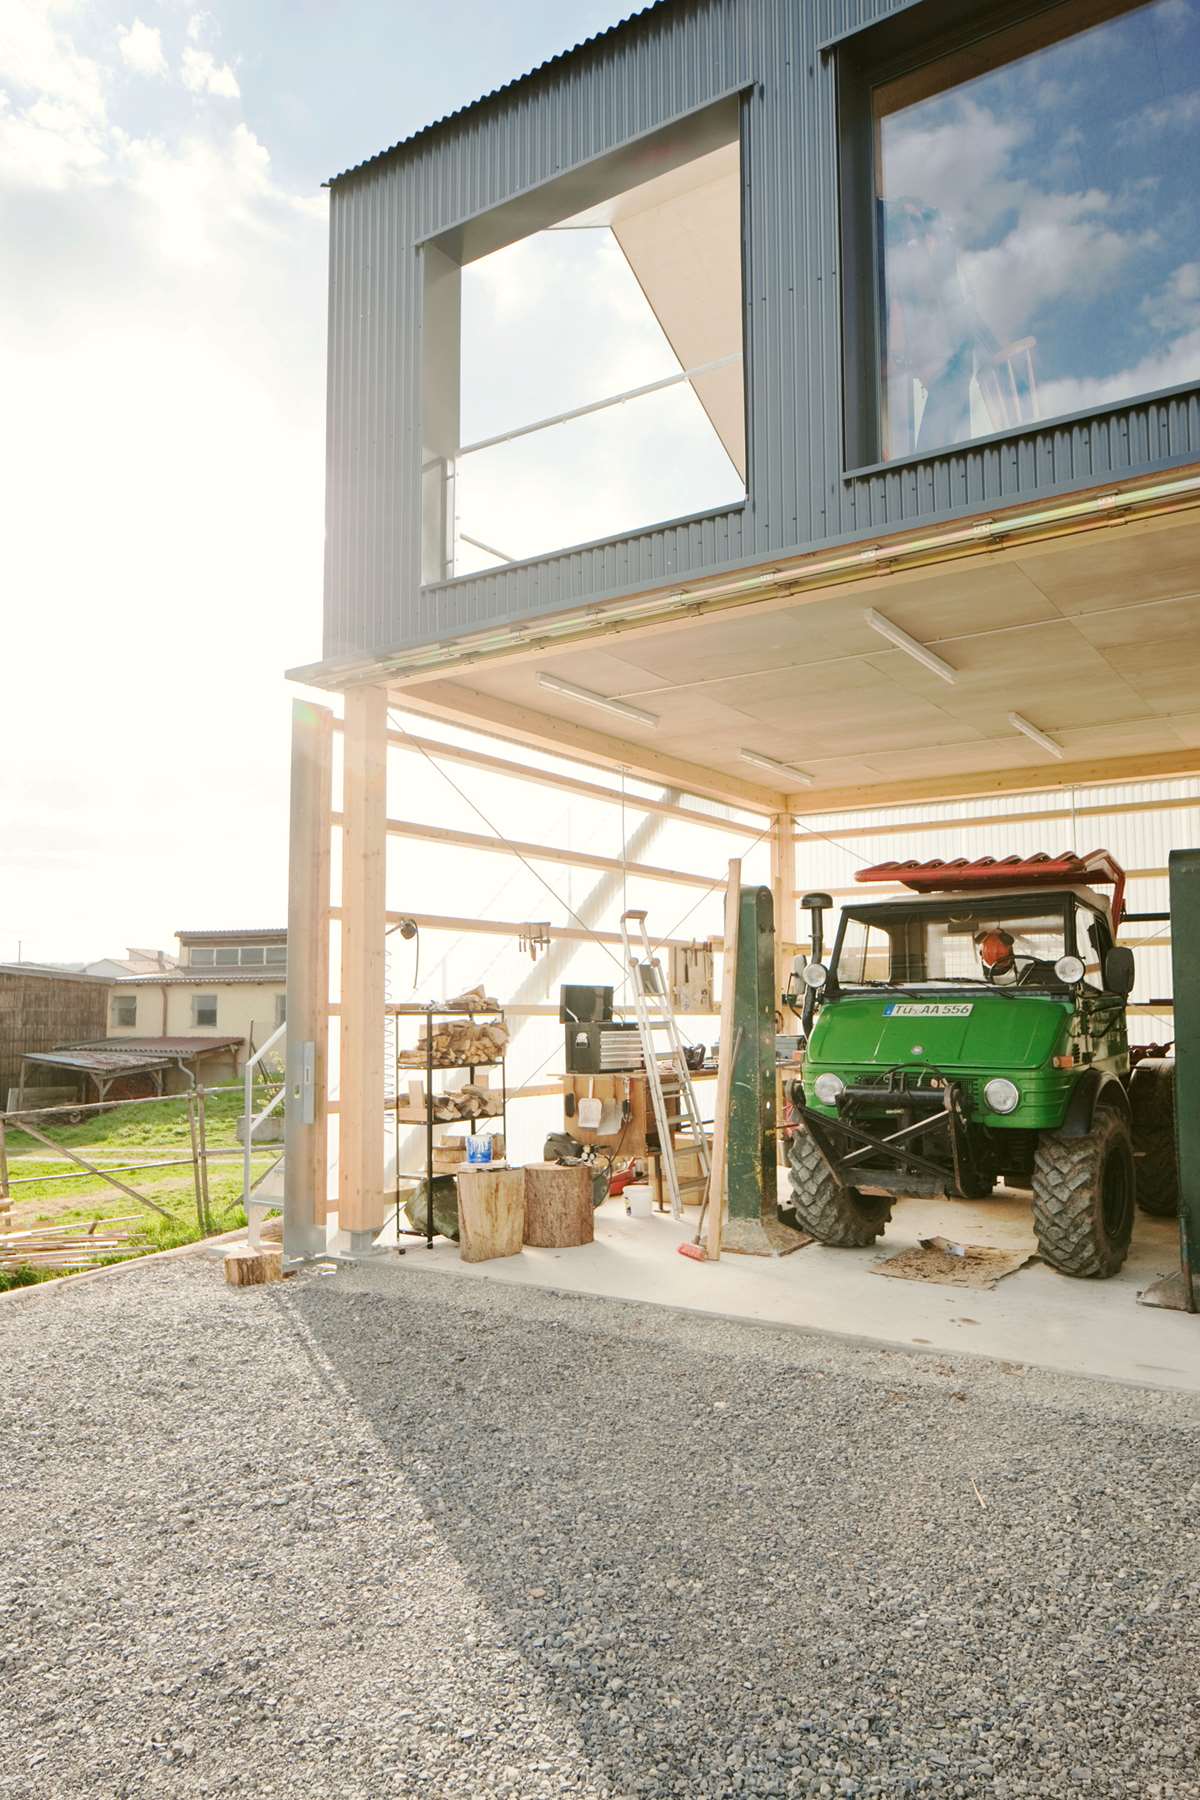 House Unimog – A home for man and his machine